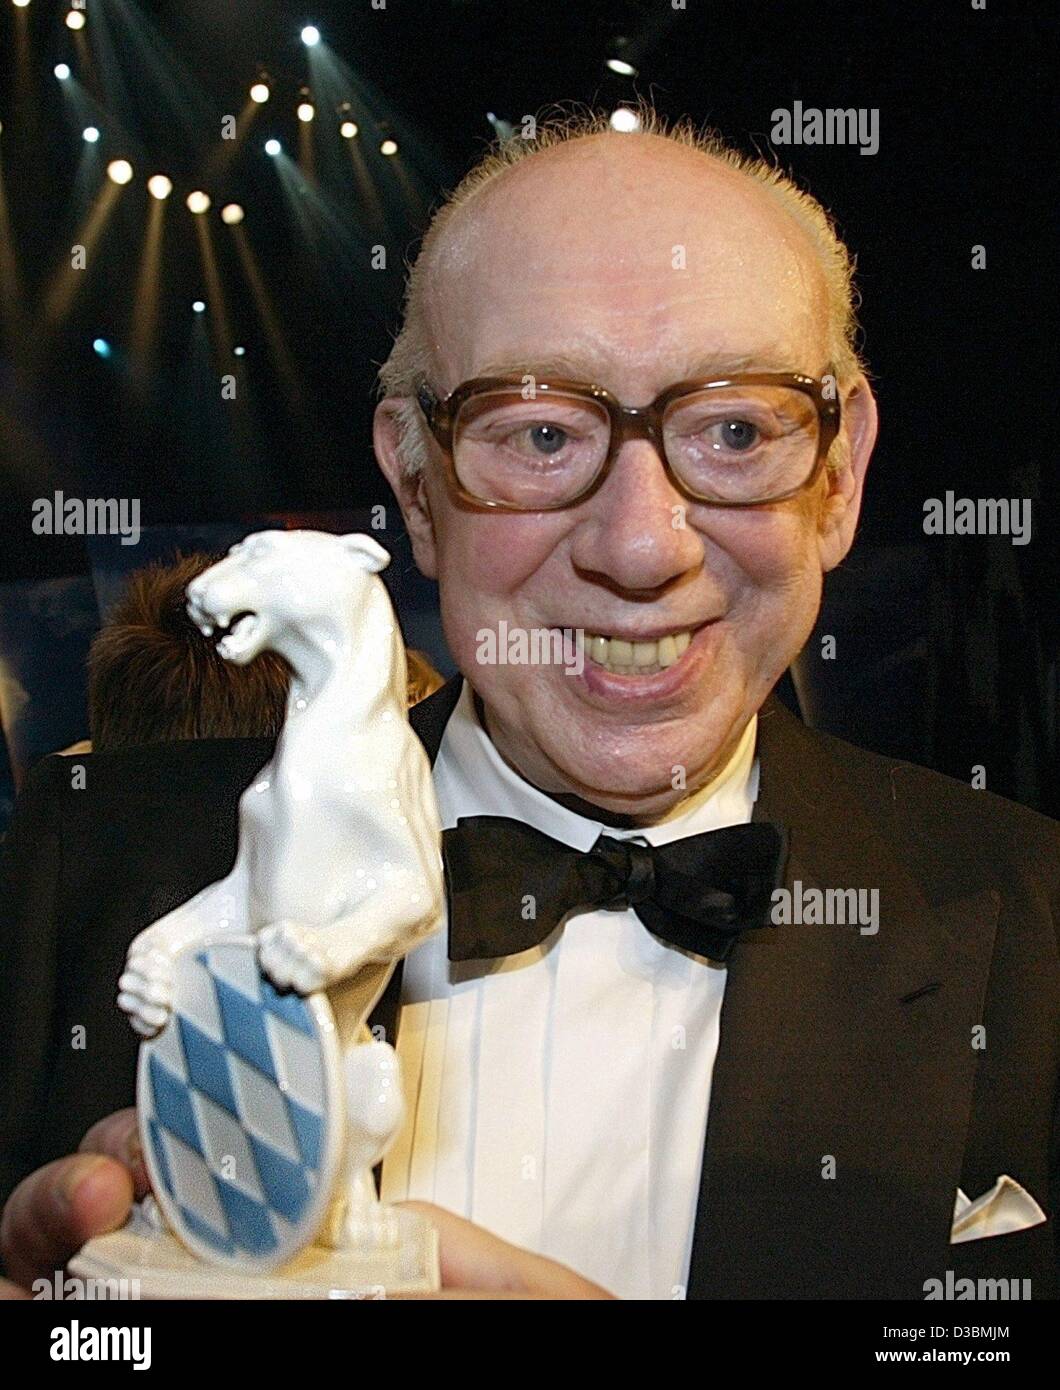 (dpa) - German actor Horst Tappert, who played Inspector Derrick from 1974 until 1998, poses with his Bayerischer Fernsehpreis award (Bavarian TV prize) in Munich, 23 May 2003. He won the special award for his fine character performance in the TV crime series 'Derrick'. When he was presented the awa Stock Photo